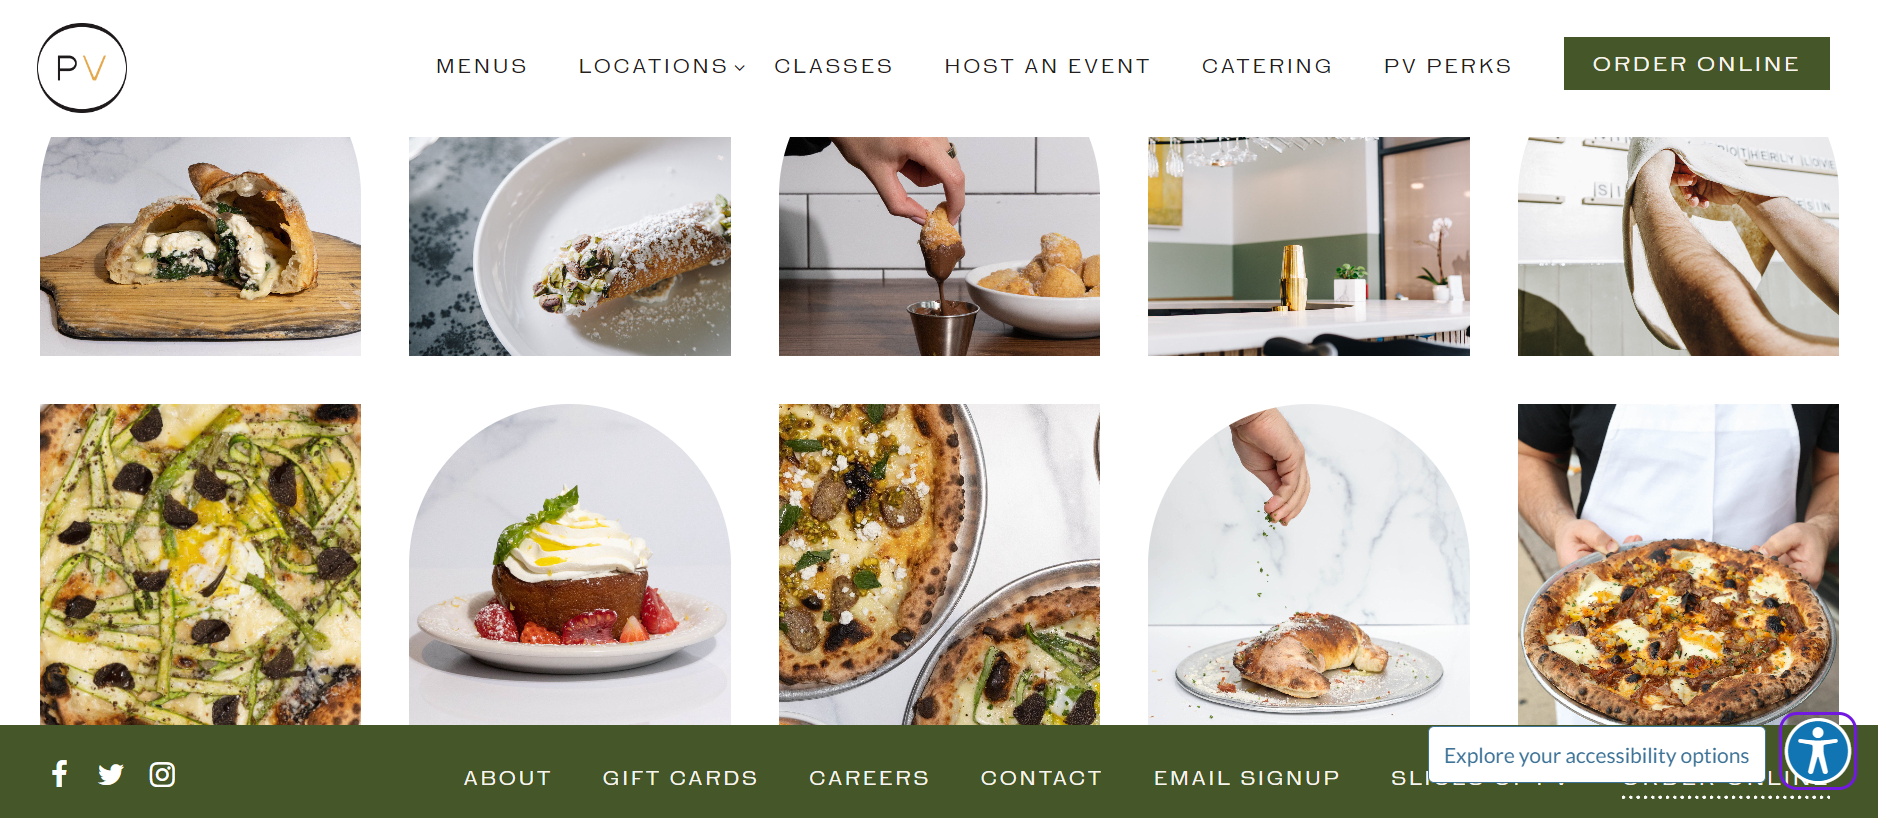 screenshot of the home page of the pizzeria vetri restaurant website 